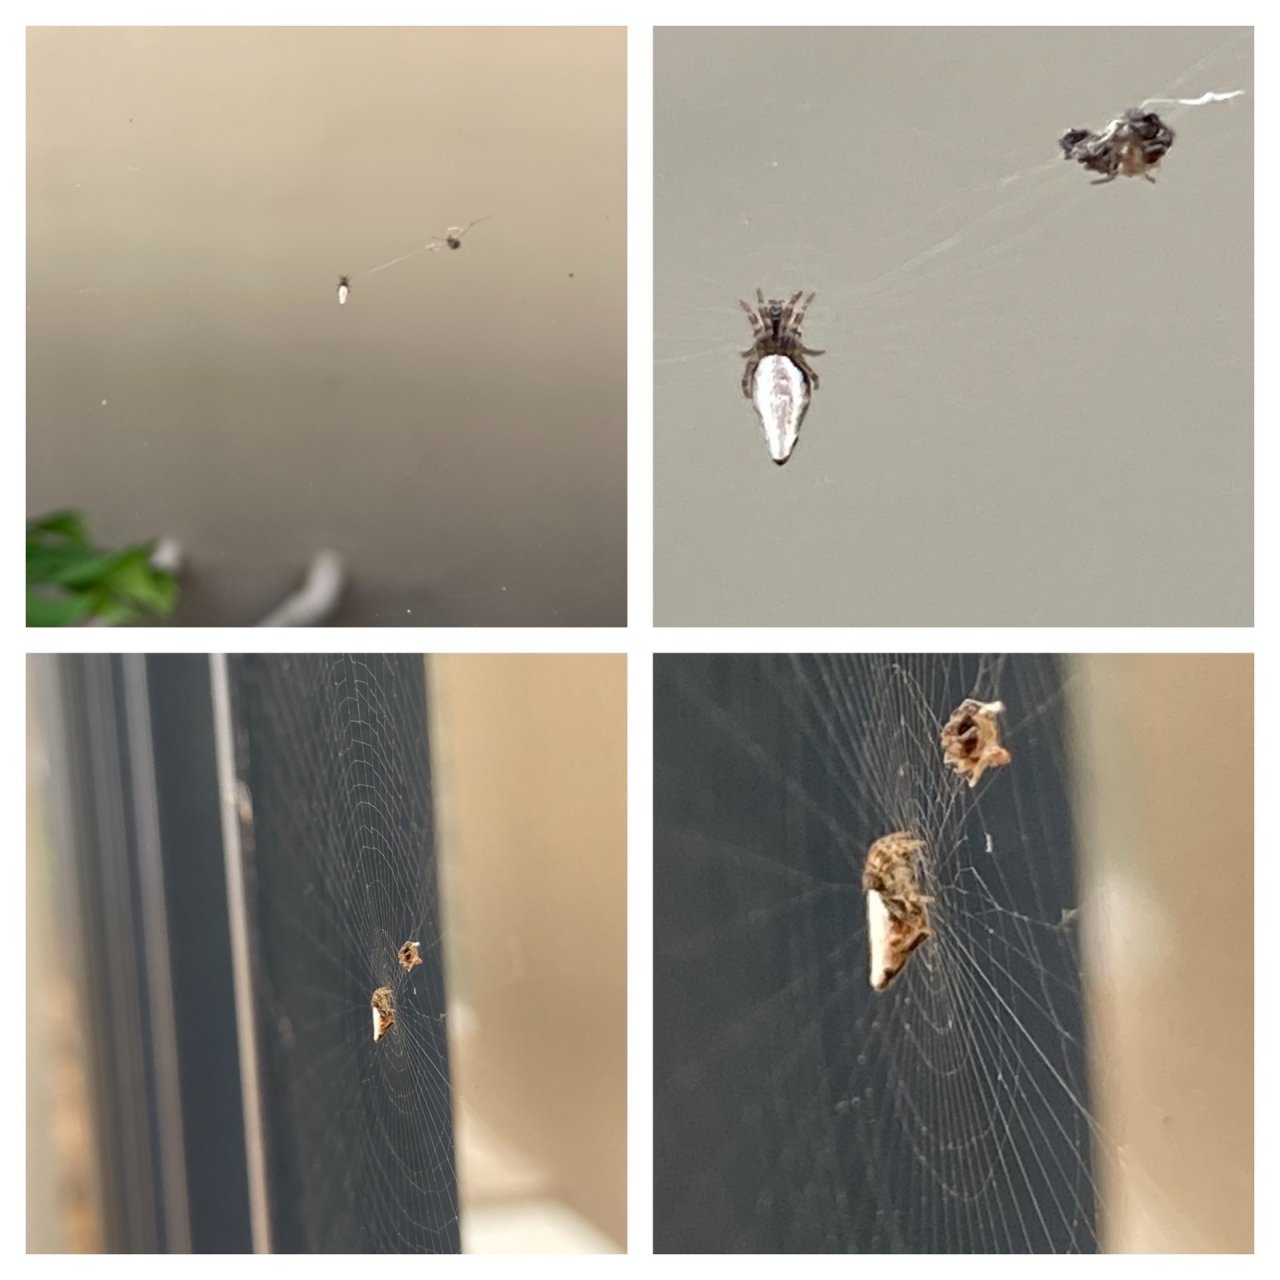 unknown species in SpiderSpotter App spotted by ednaward on 26.12.2020